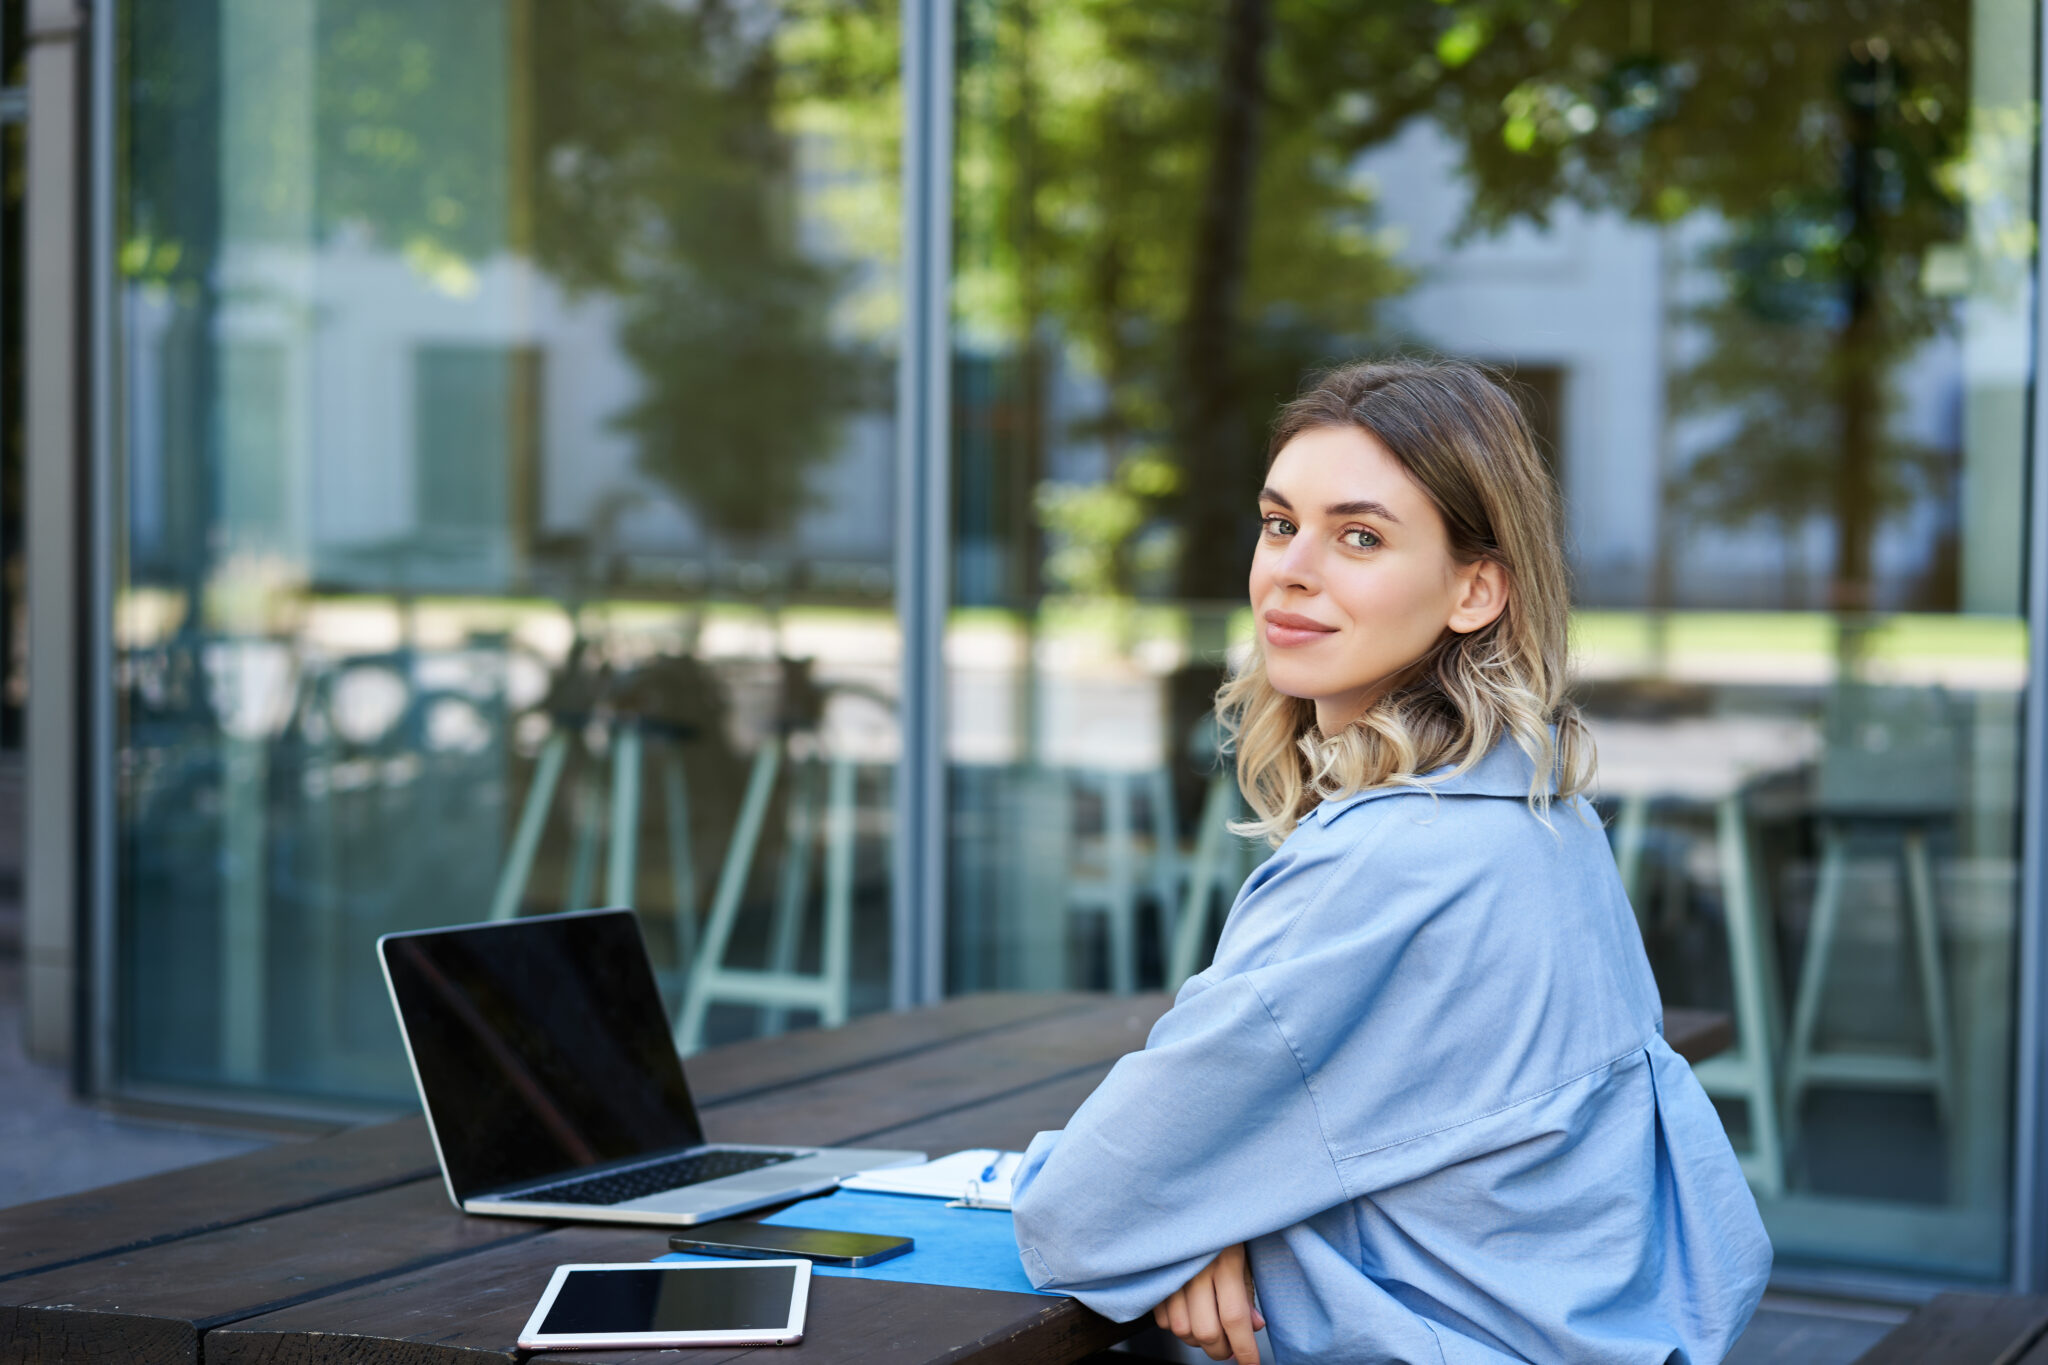 Portrait of young businesswoman working, using laptop while sitting outdoors. Corporate woman on video chat meeting.